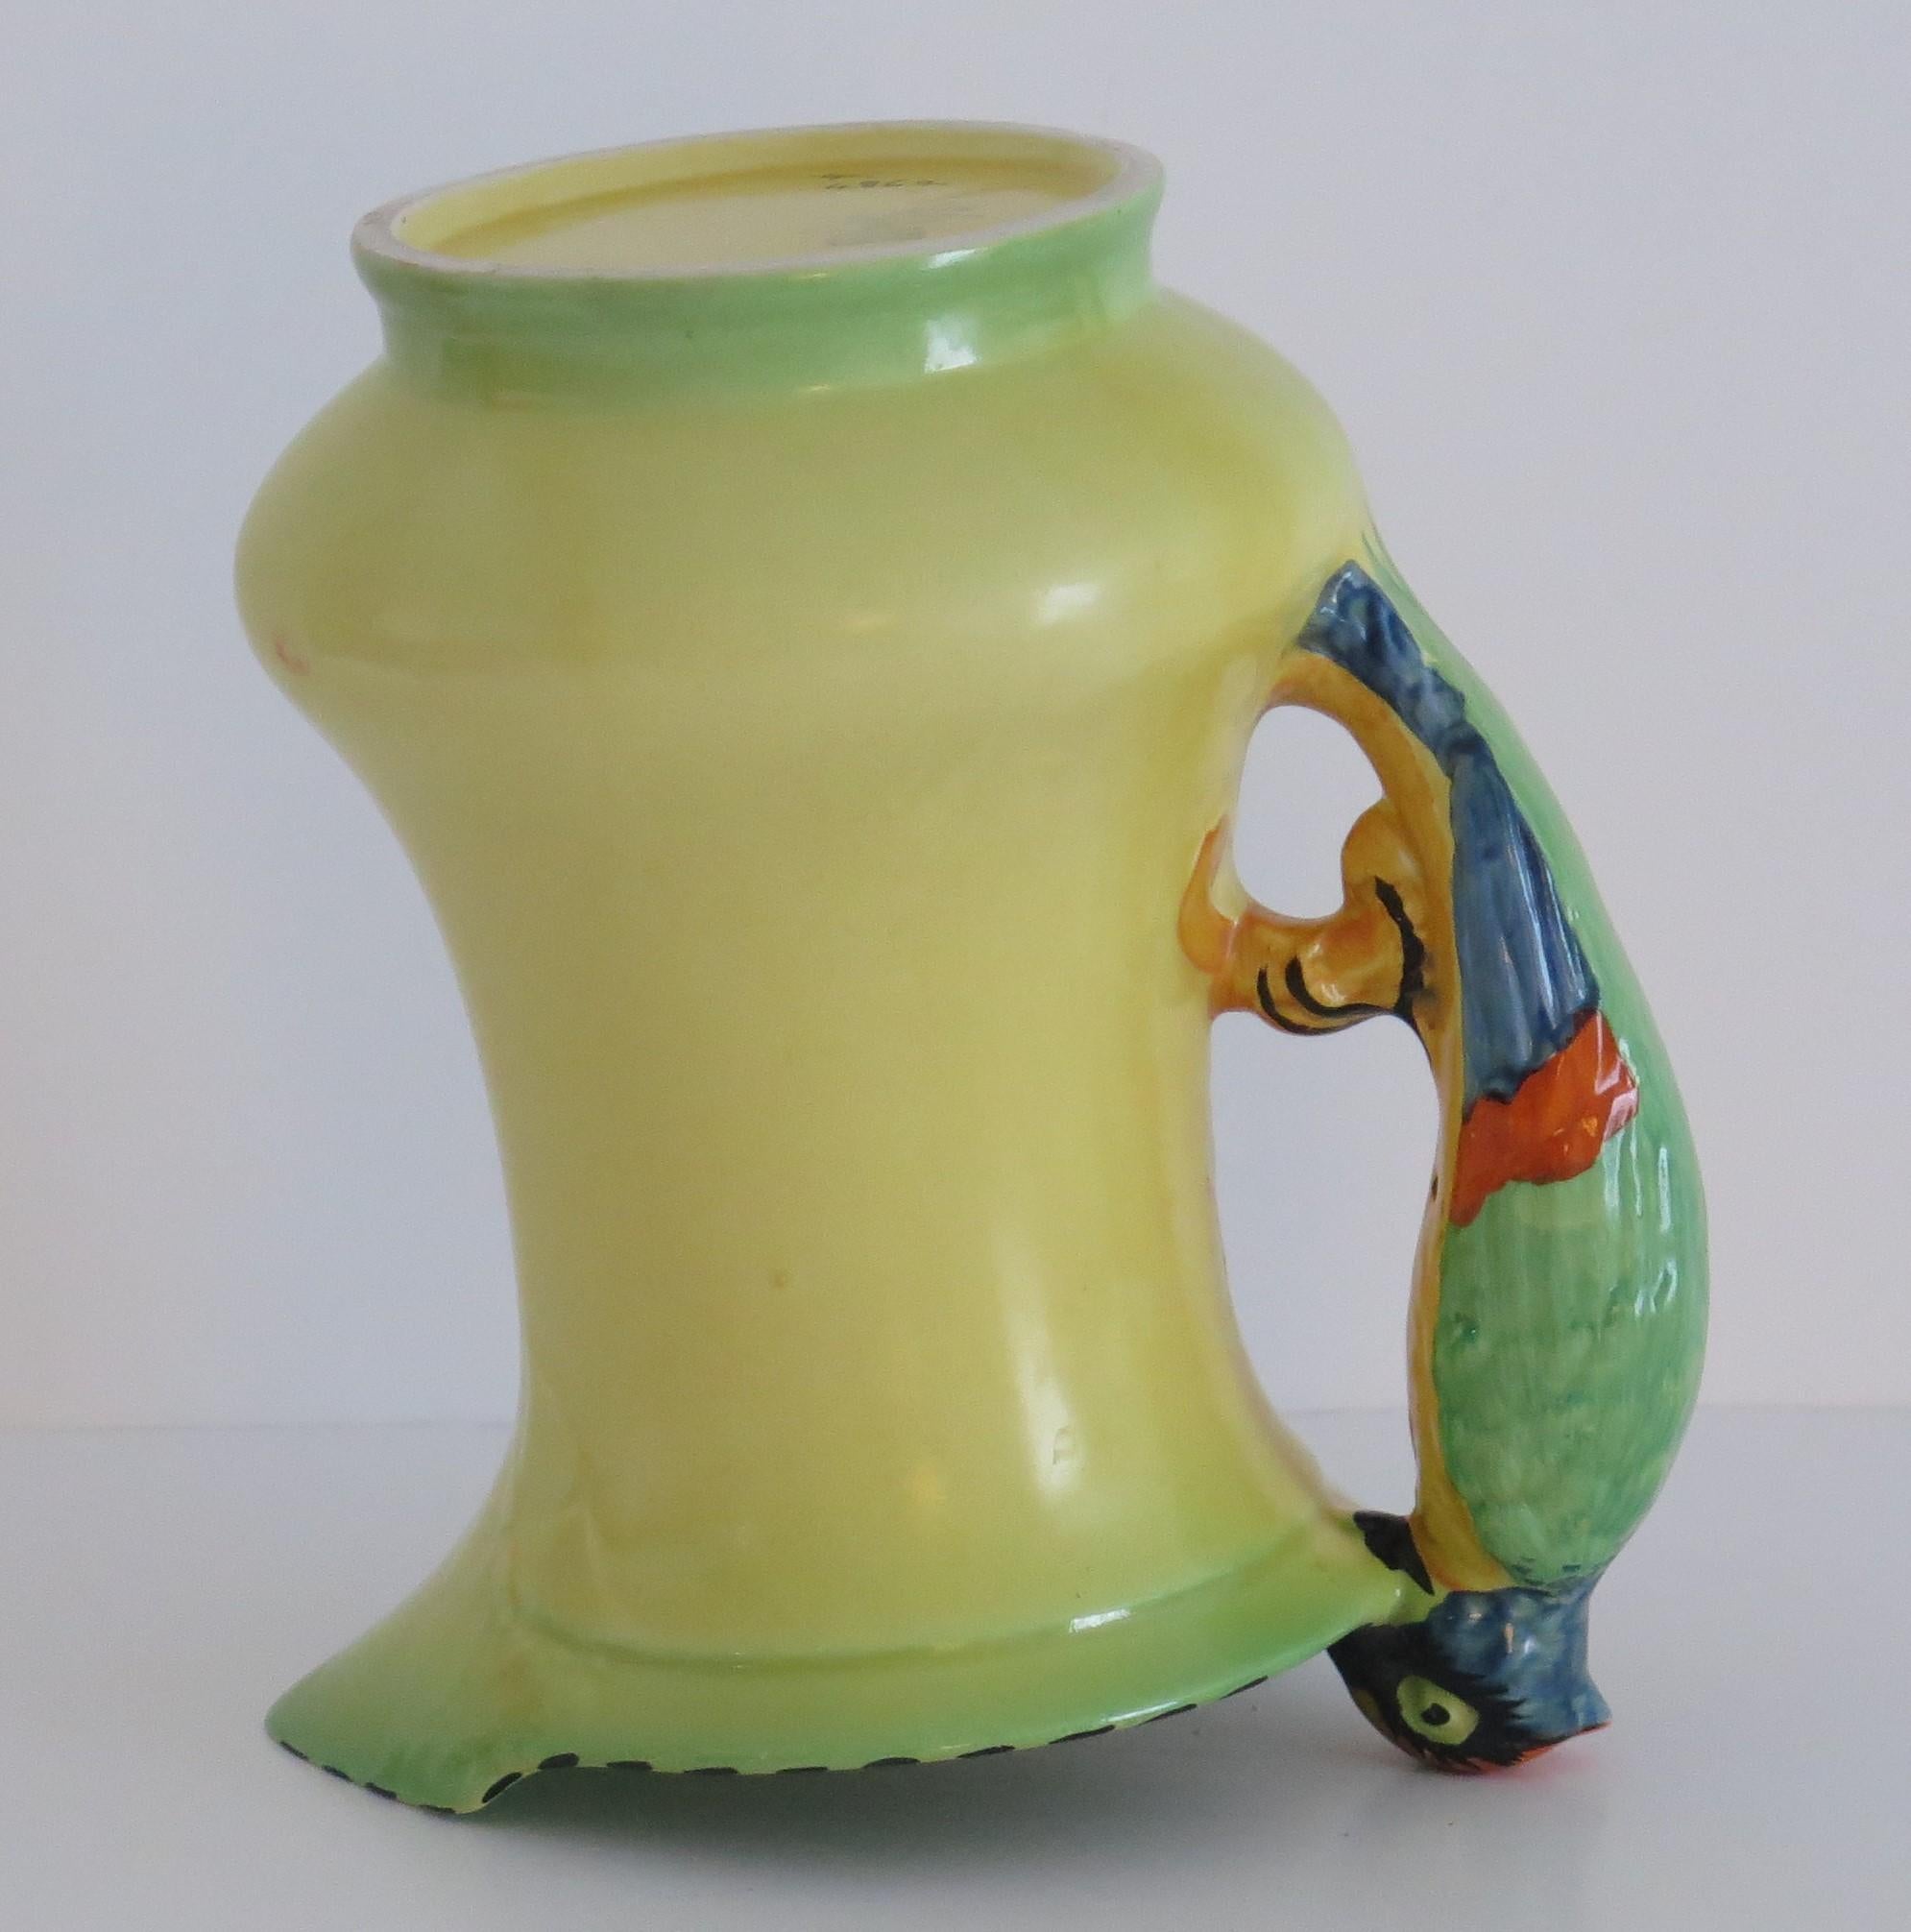 Art Deco Burleigh Ware Pottery Jug or Pitcher Parrot Handle Hand-Painted, 1930s For Sale 2